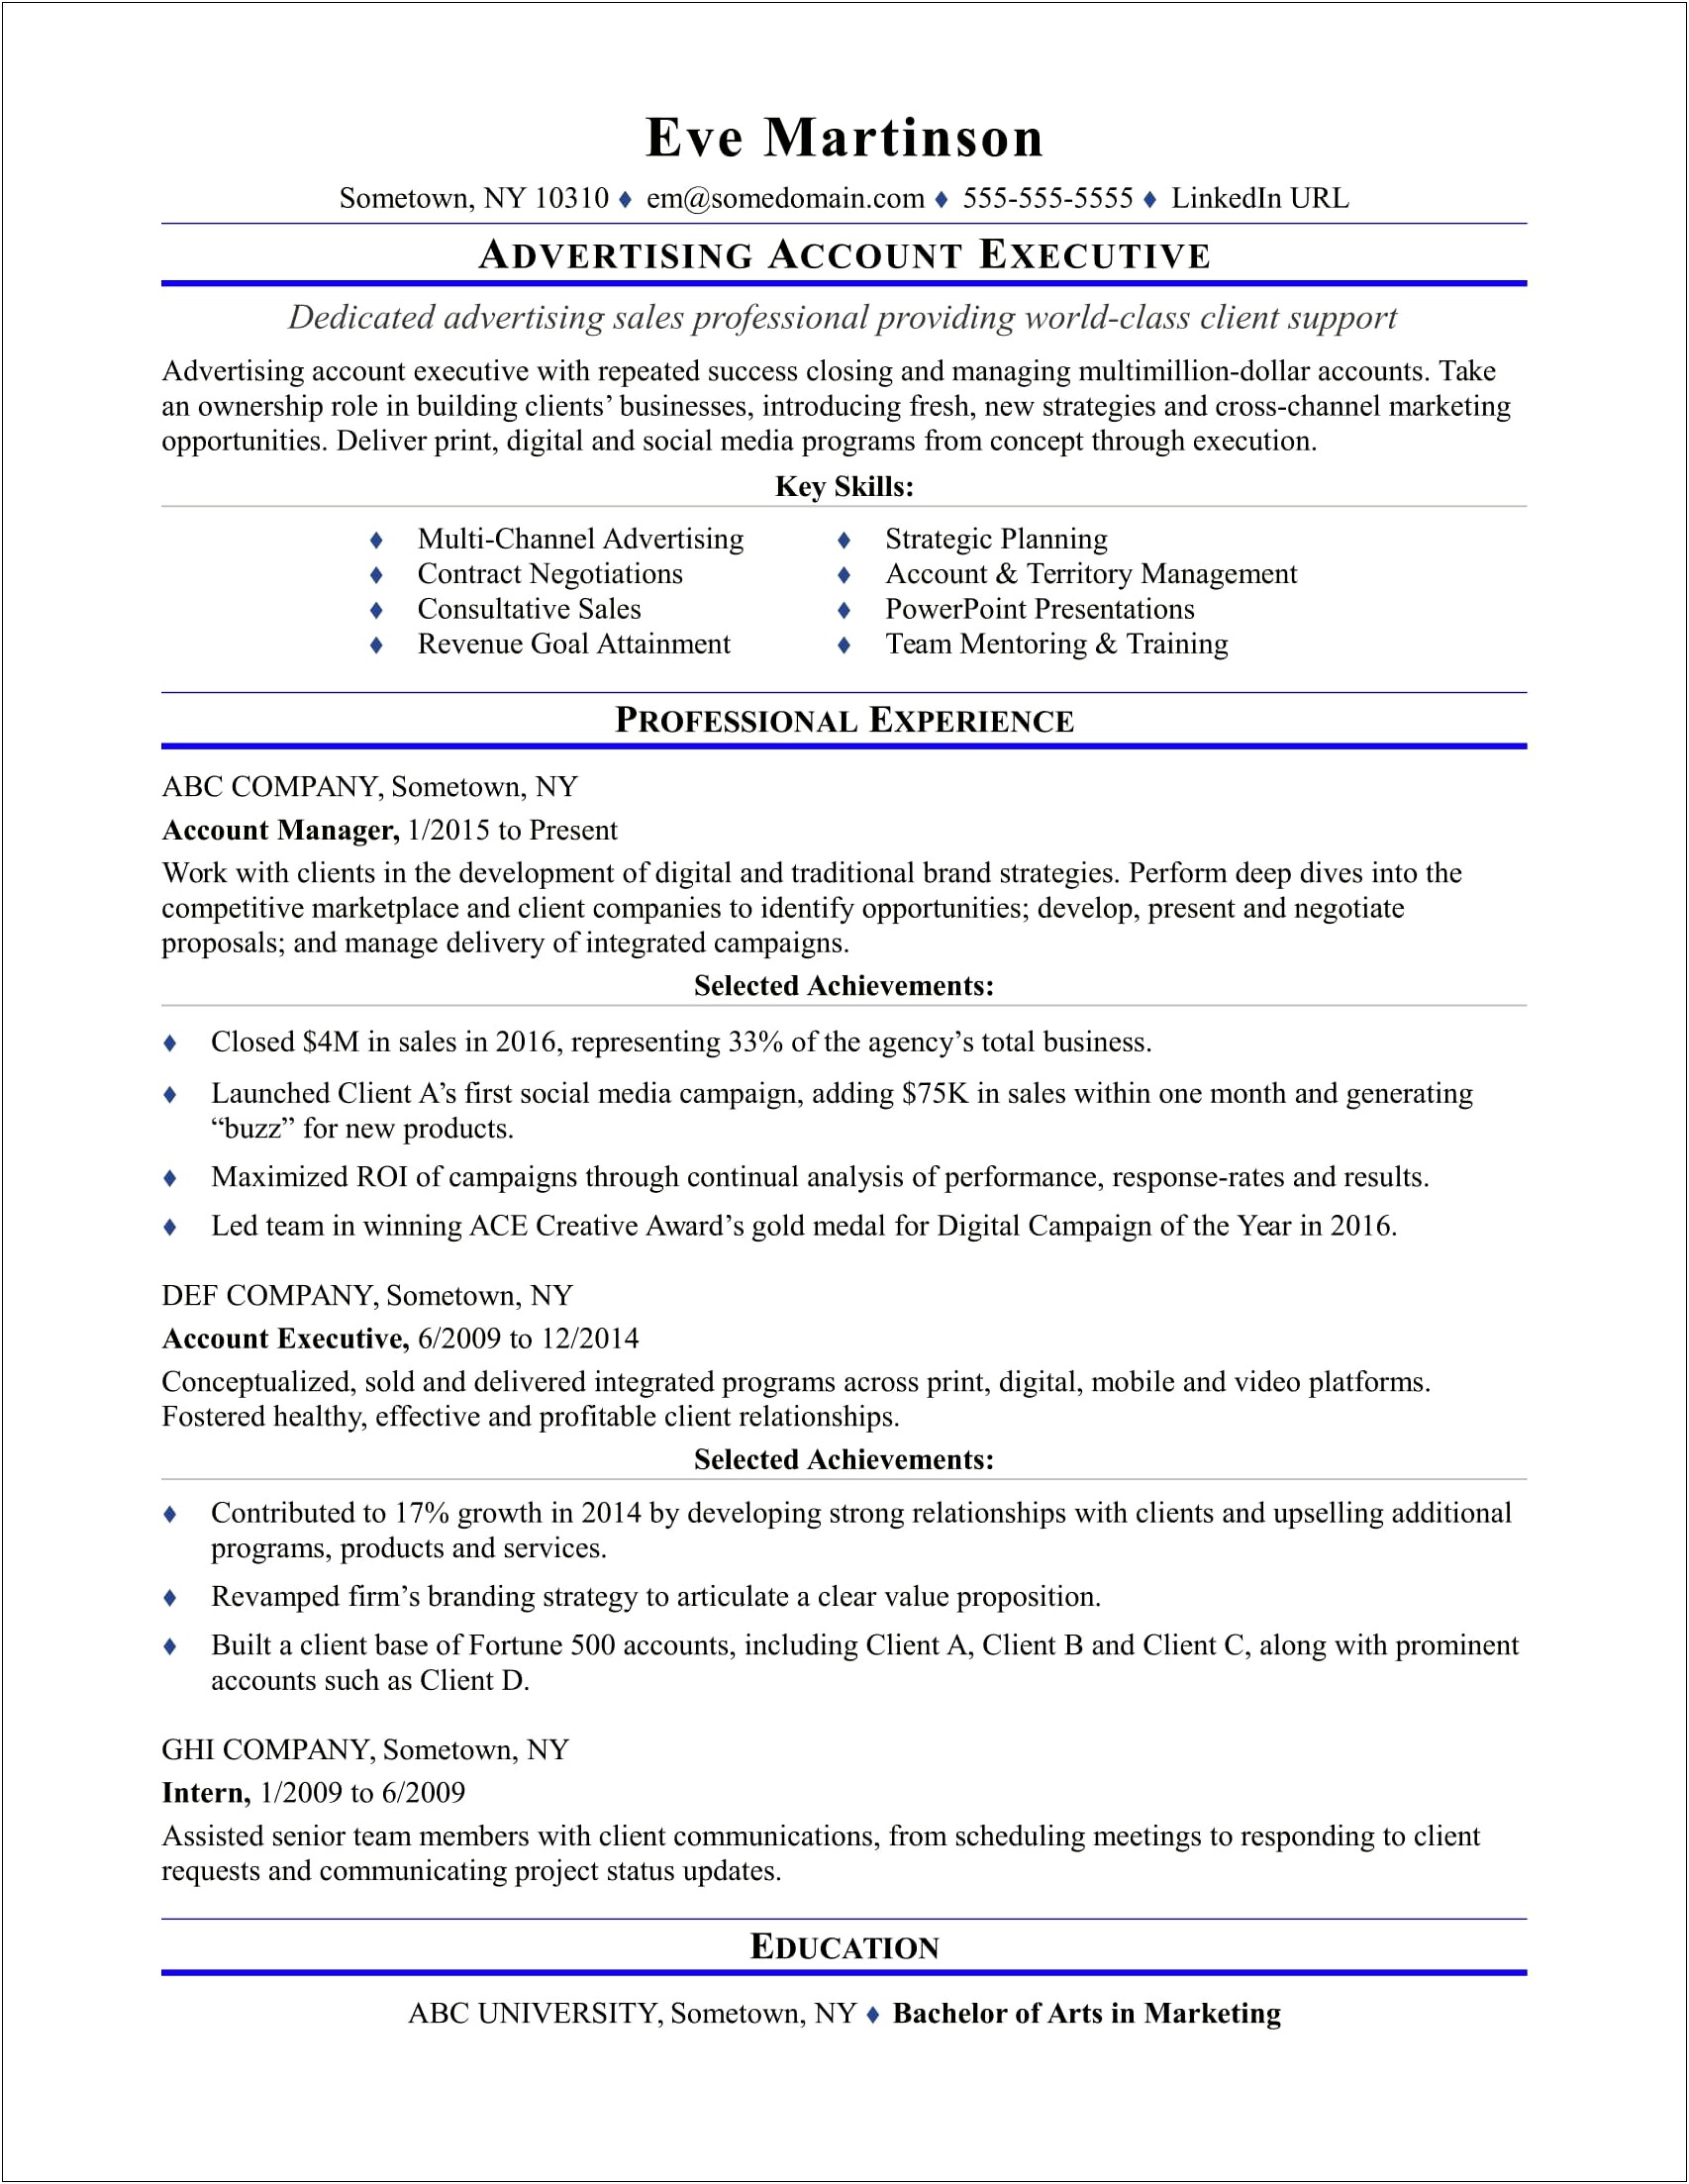 Examples Of Resumes Sent To Target